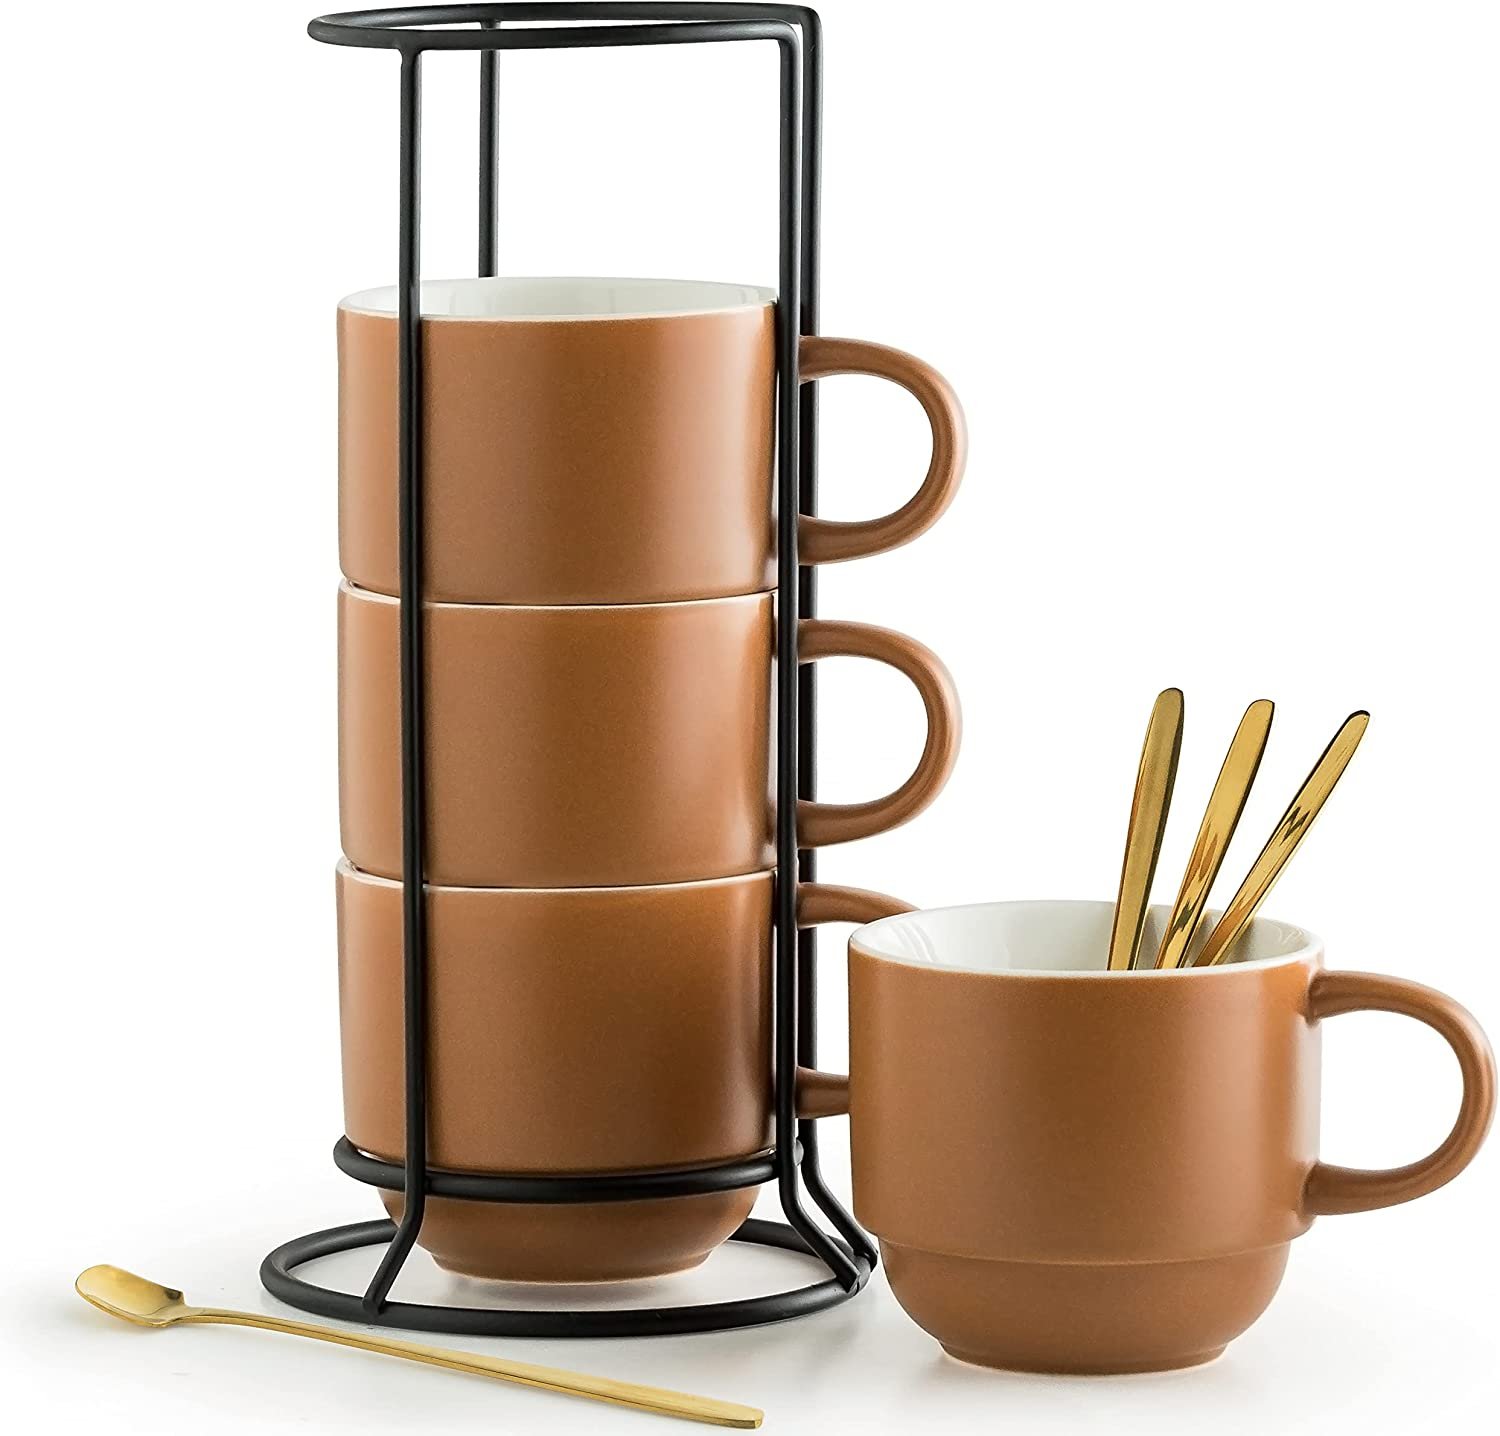 Coffee Station Essentials - A Blissful Nest